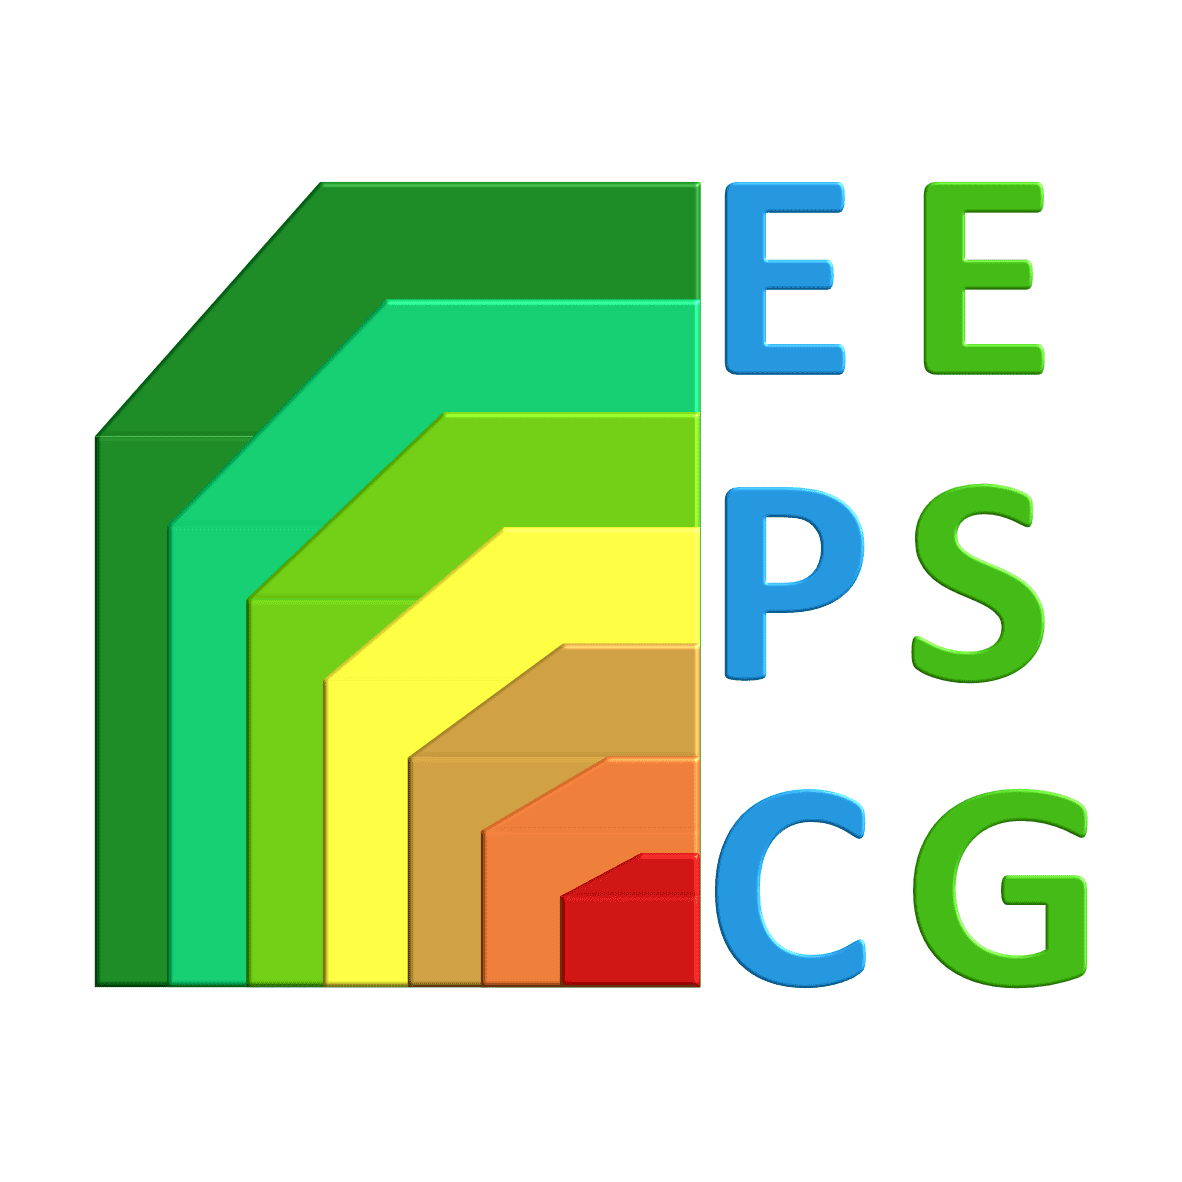 EPC and ESG ... Deadlines looming